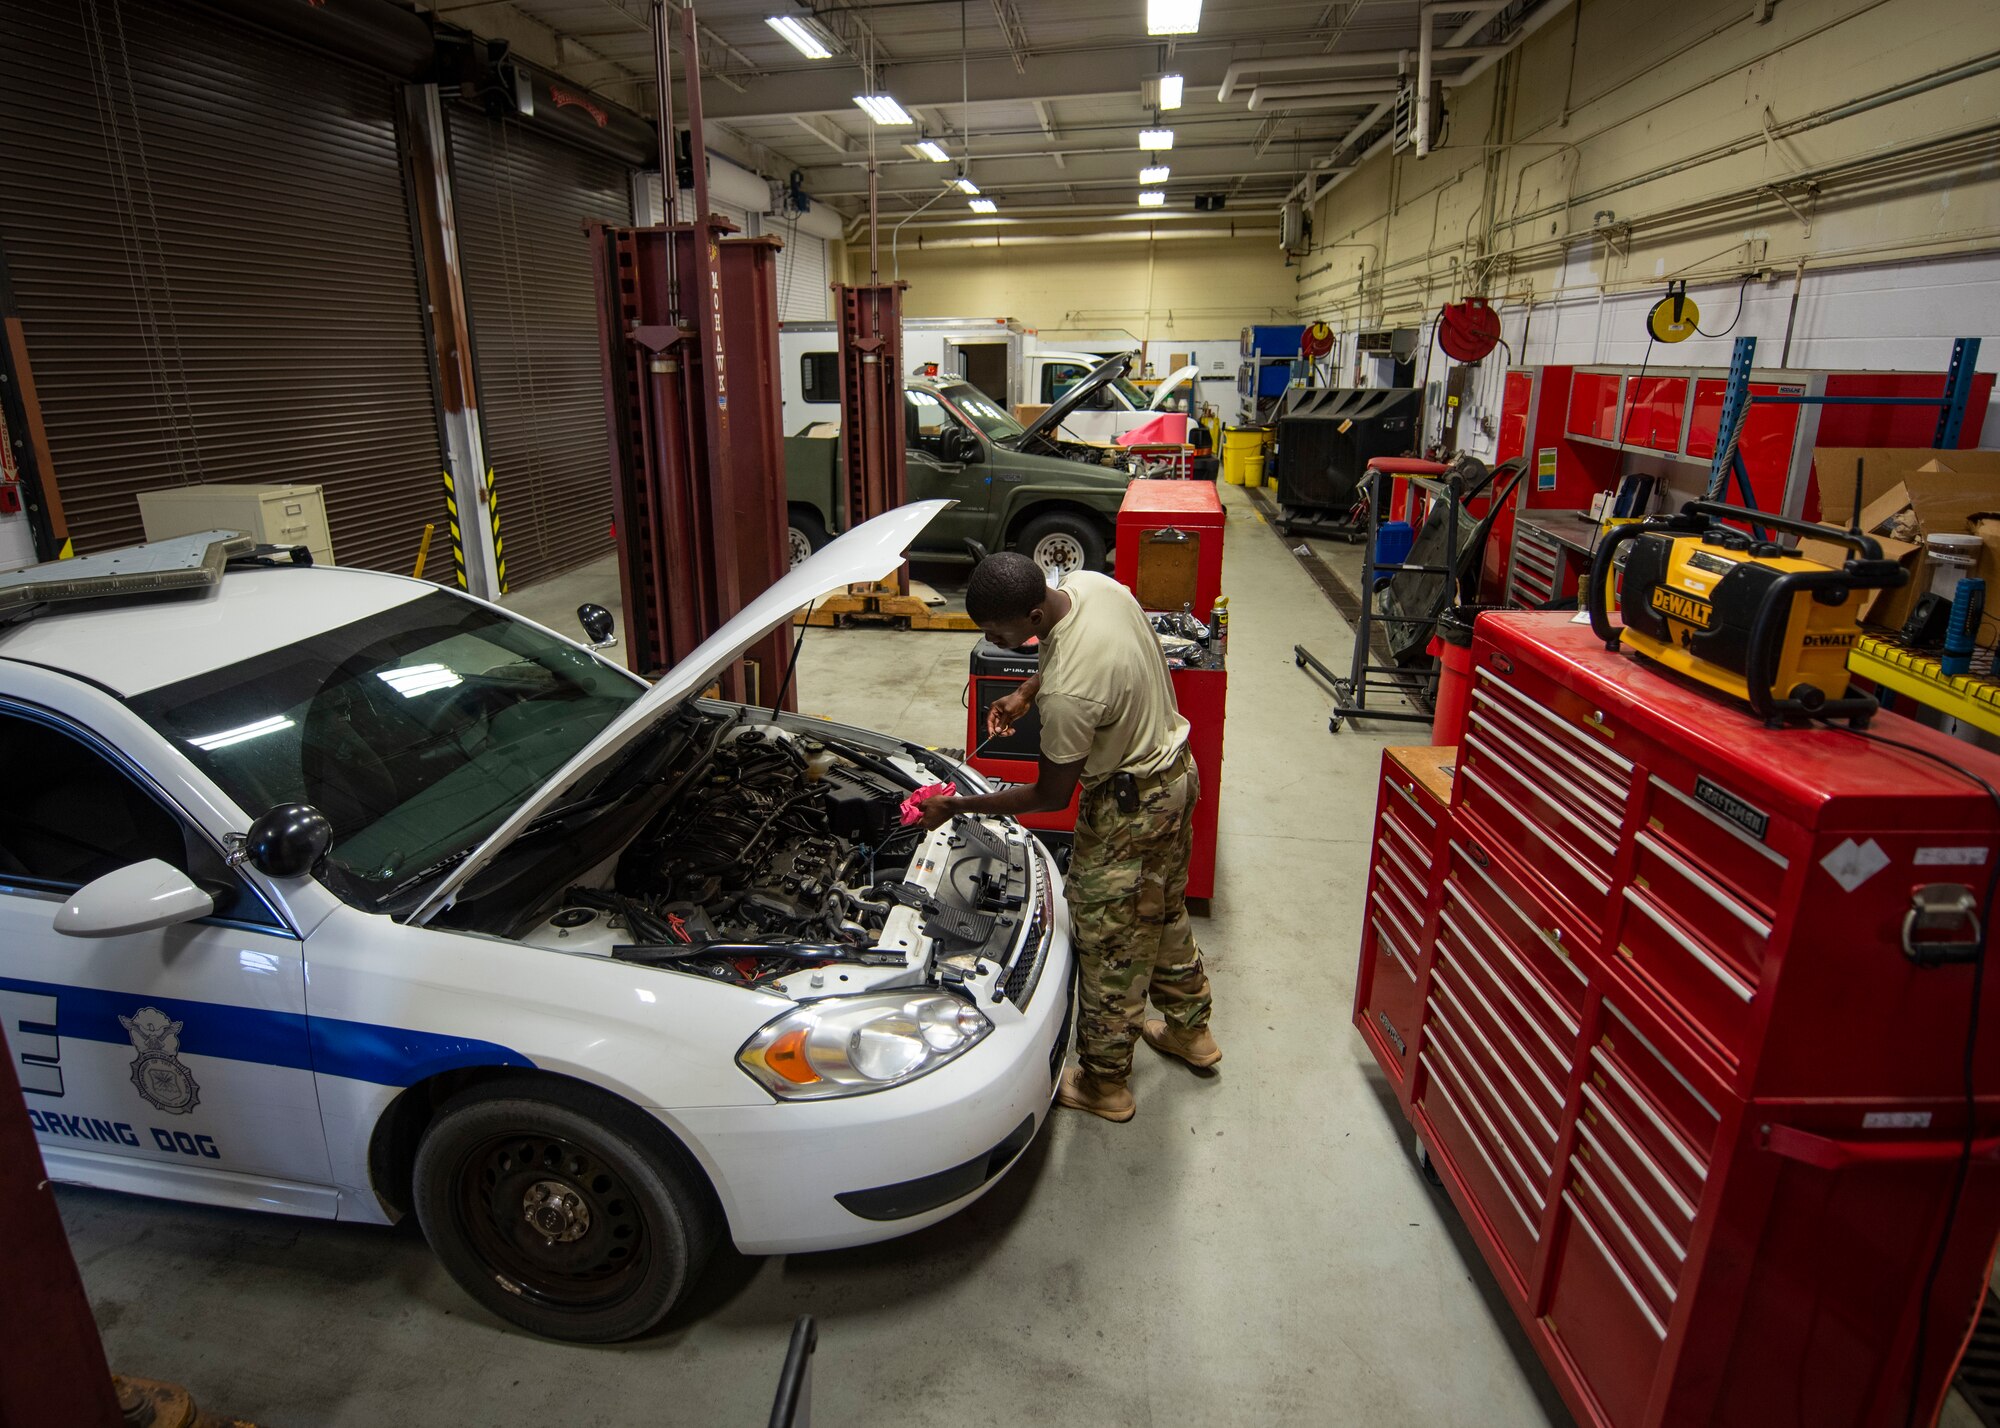 U.S. Air Force Staff Sgt. Trecel Crawford, 325th Logistics Readiness Squadron vehicle mechanic, performs preventative maintenance on a 325th Security Forces Squadron vehicle June 4, 2019, at Tyndall Air Force Base, Florida.